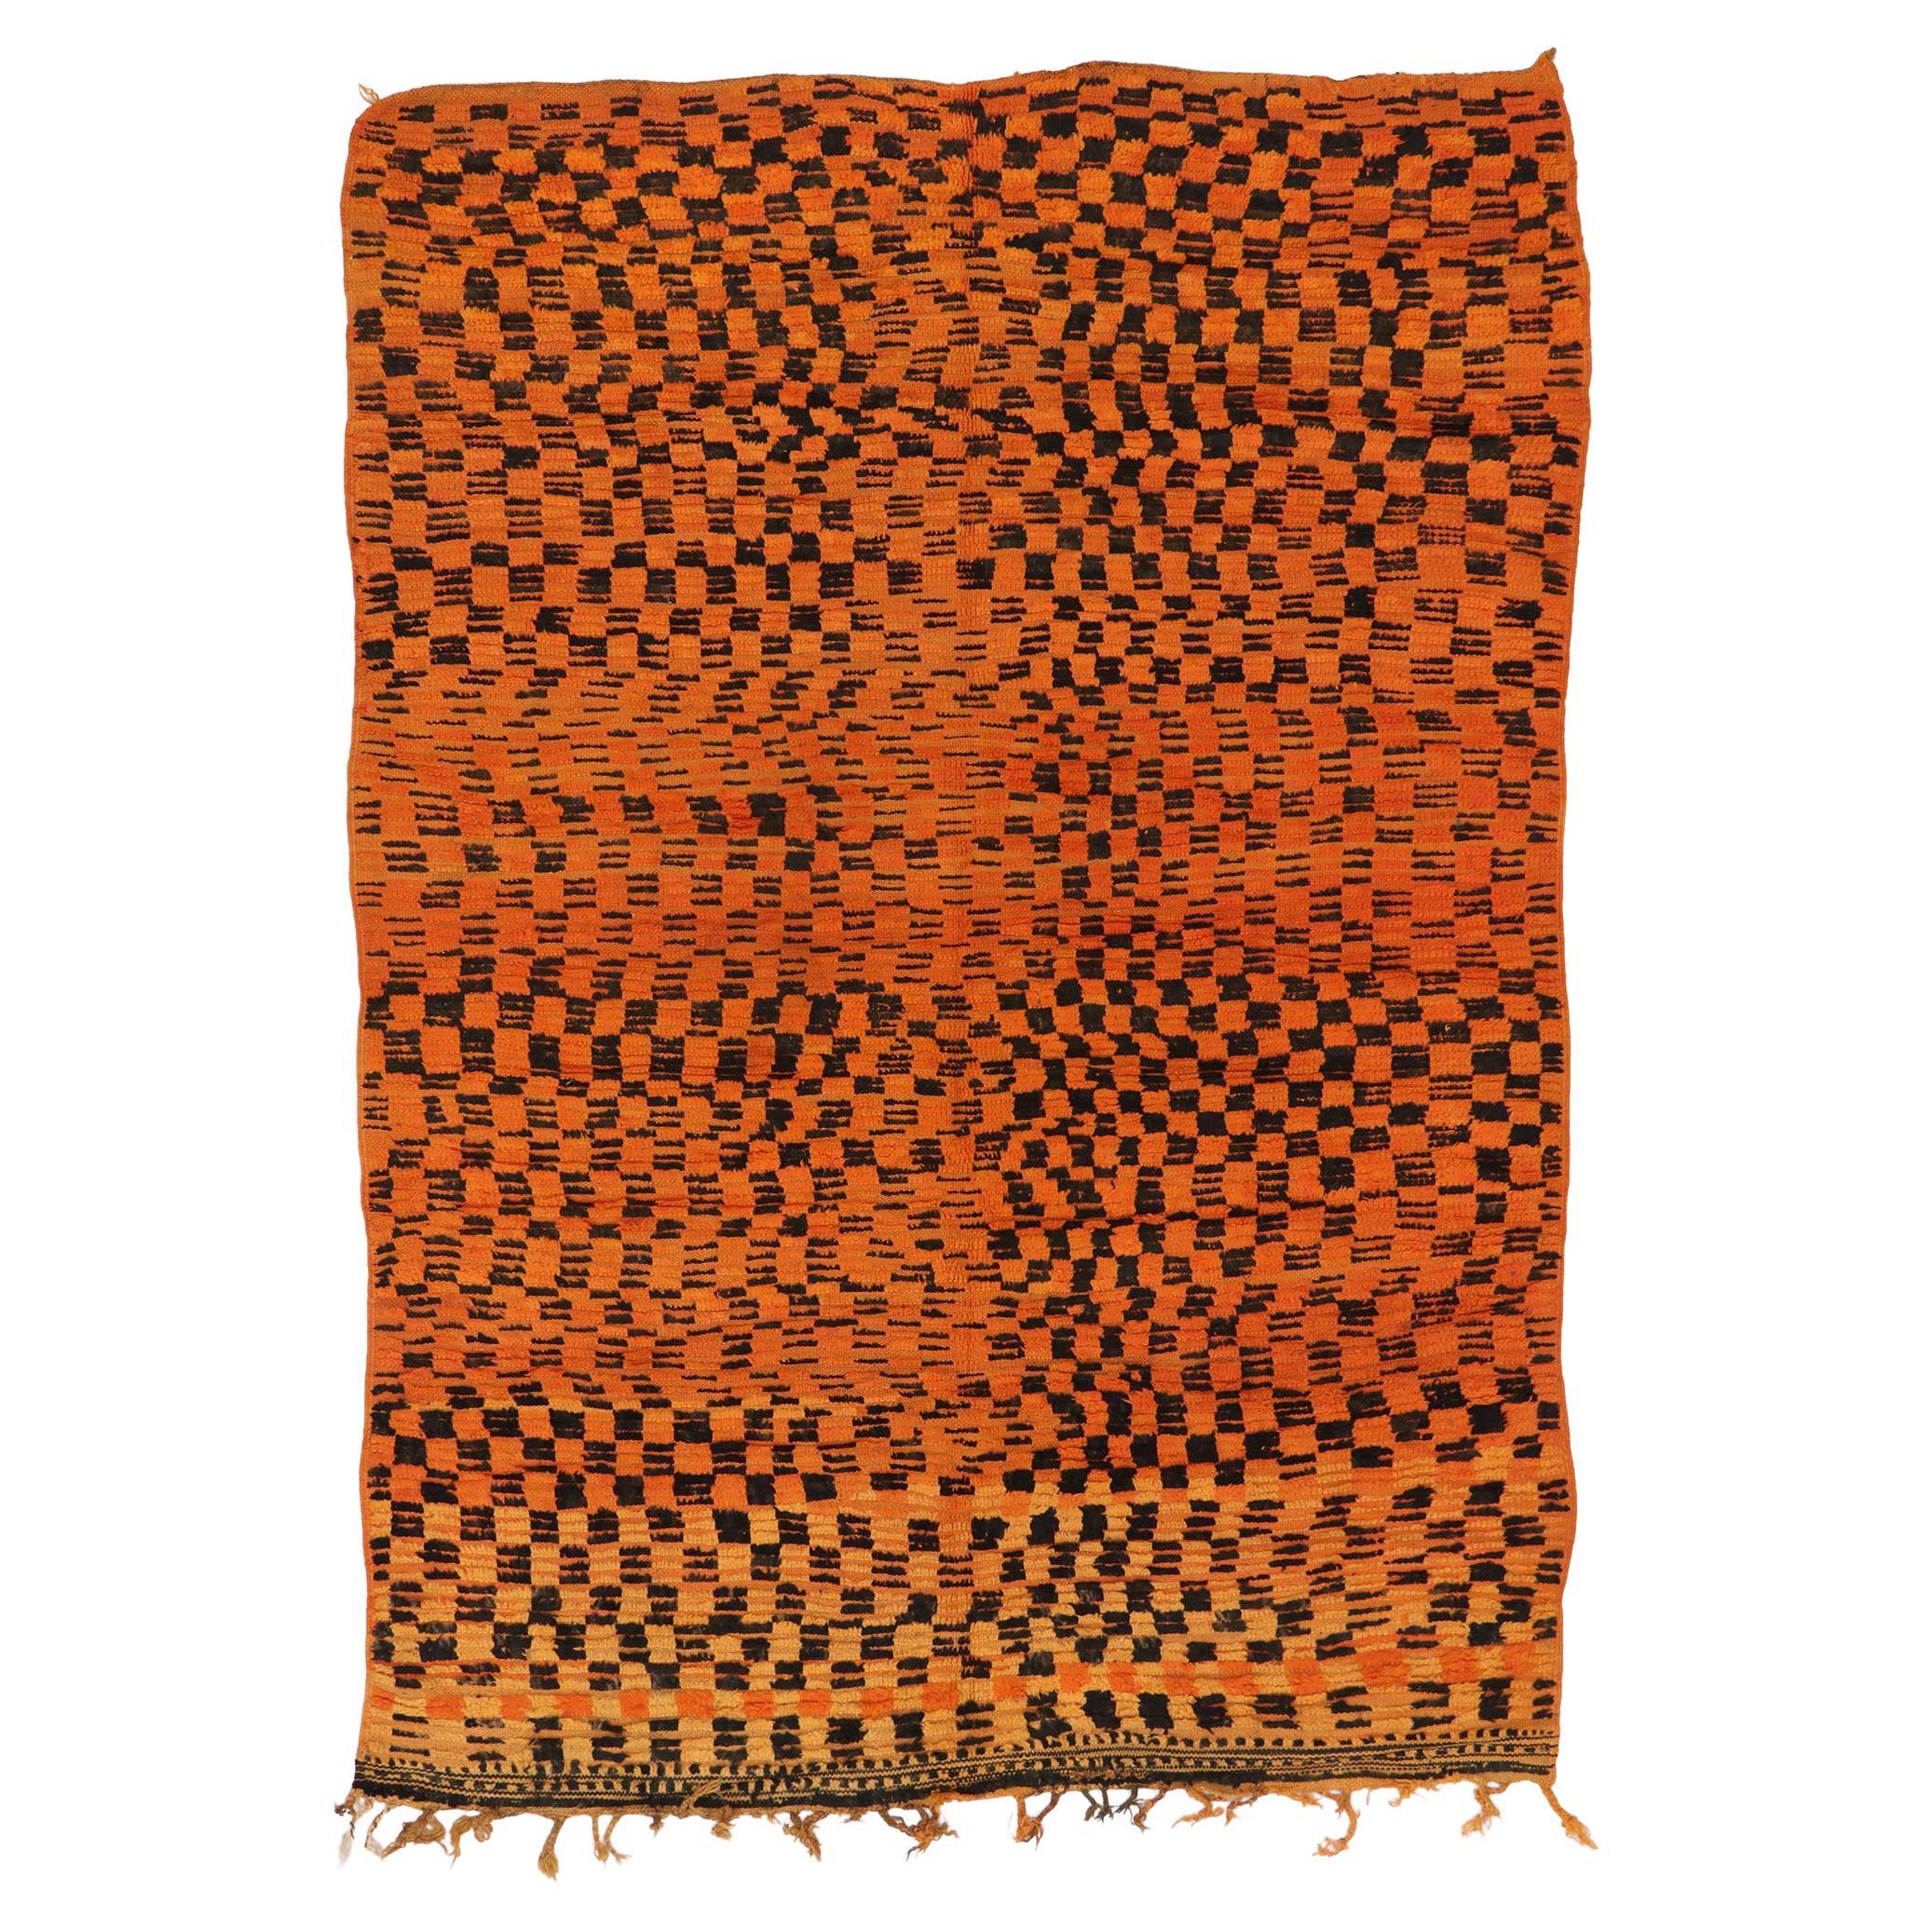 Vintage Moroccan Rug, Nomadic Charm Meets Rugged Beauty